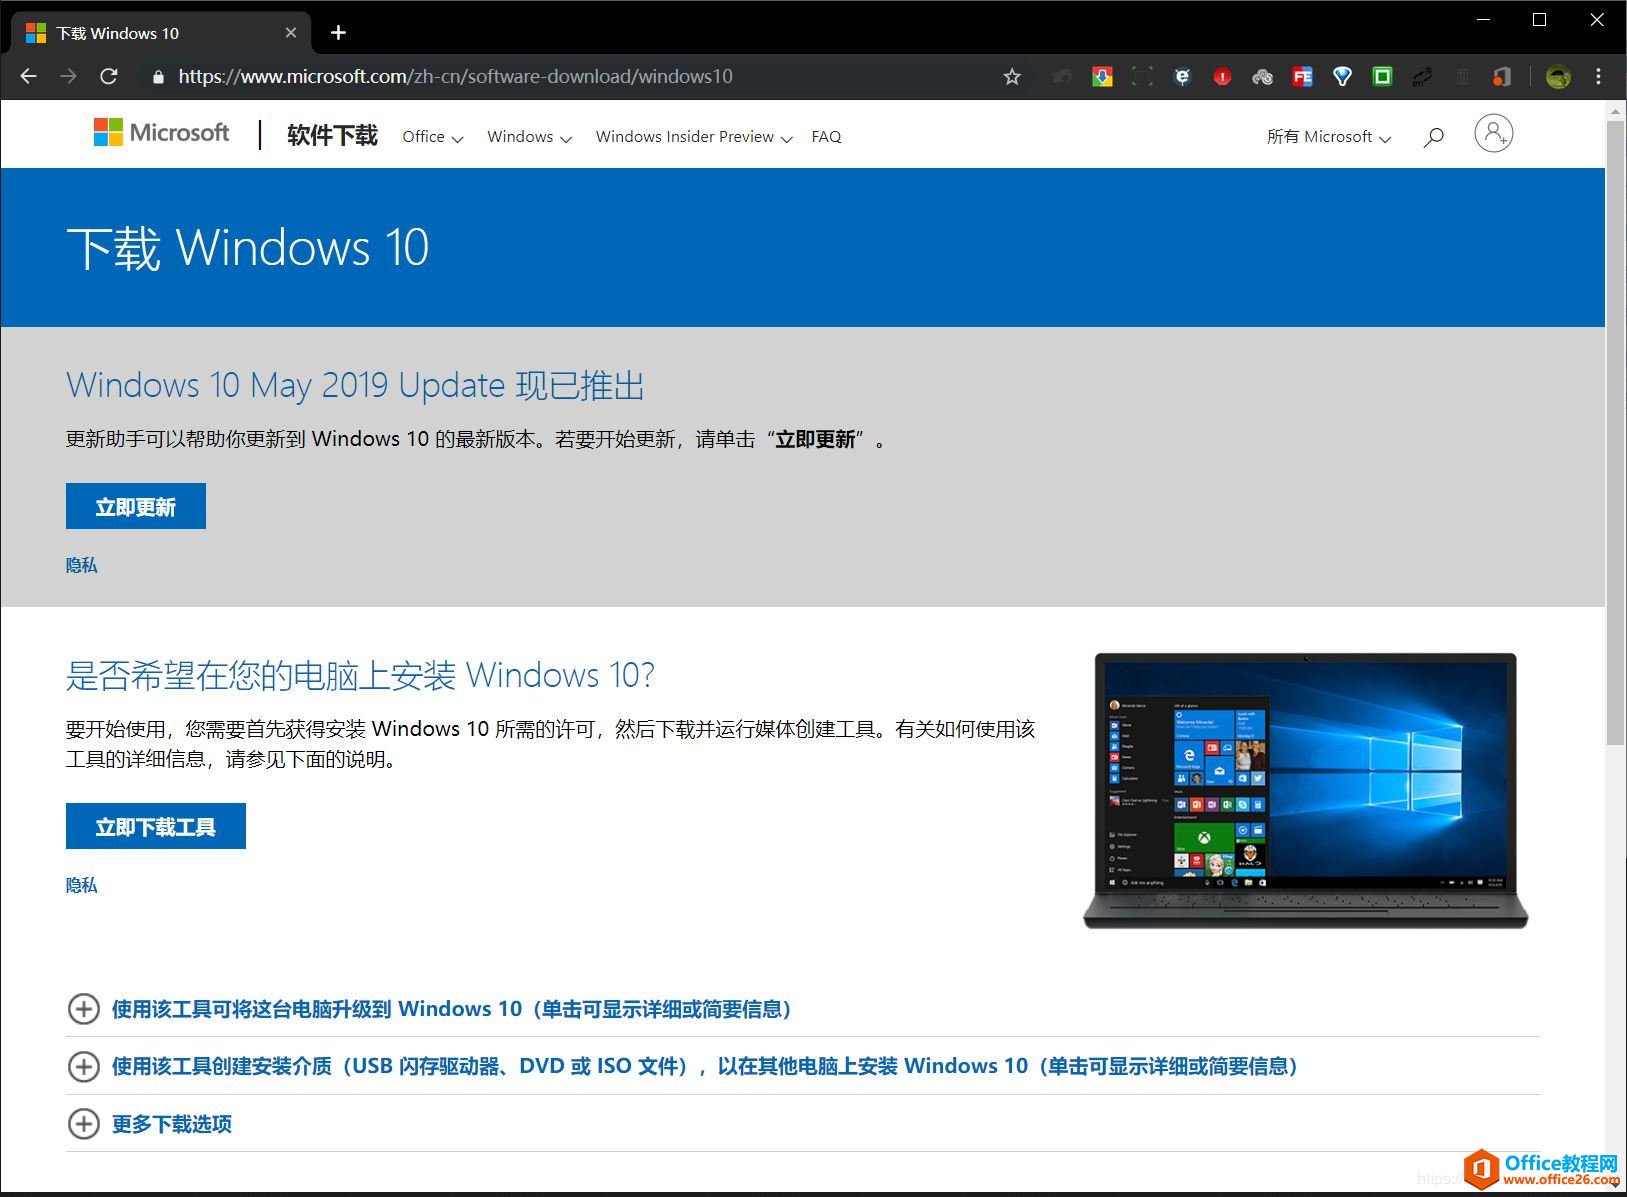 <b>电脑激活office2016遇：The Software Licensing Service reported that the product SKU is not found.</b>